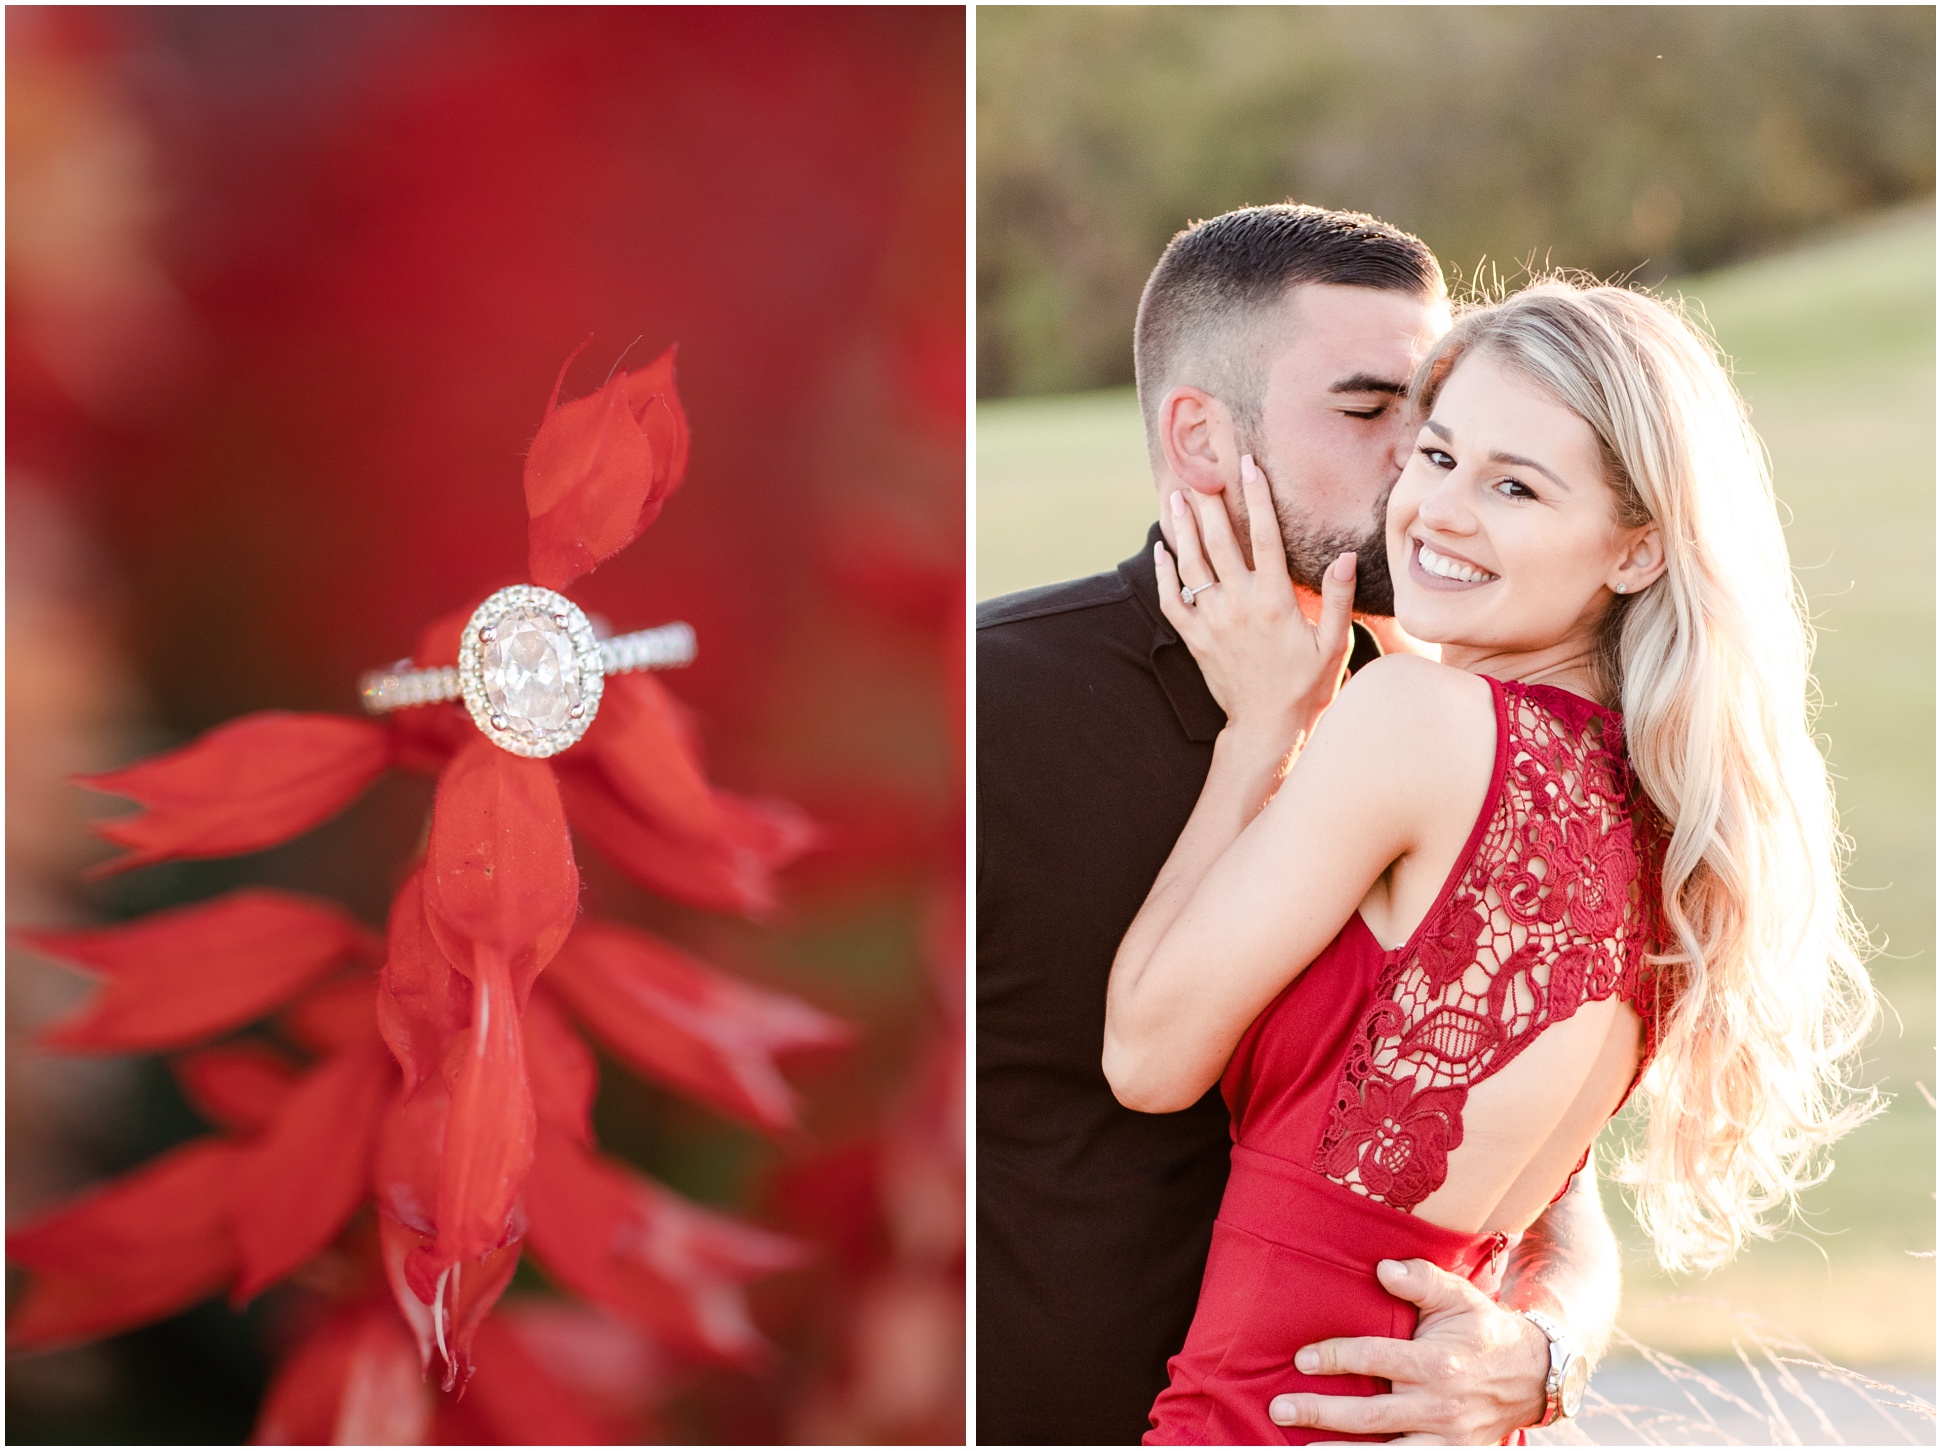 Oval engagement ring on a red flower stem, right: Landry wearing a red jumpsuit as her fiance kisses her.